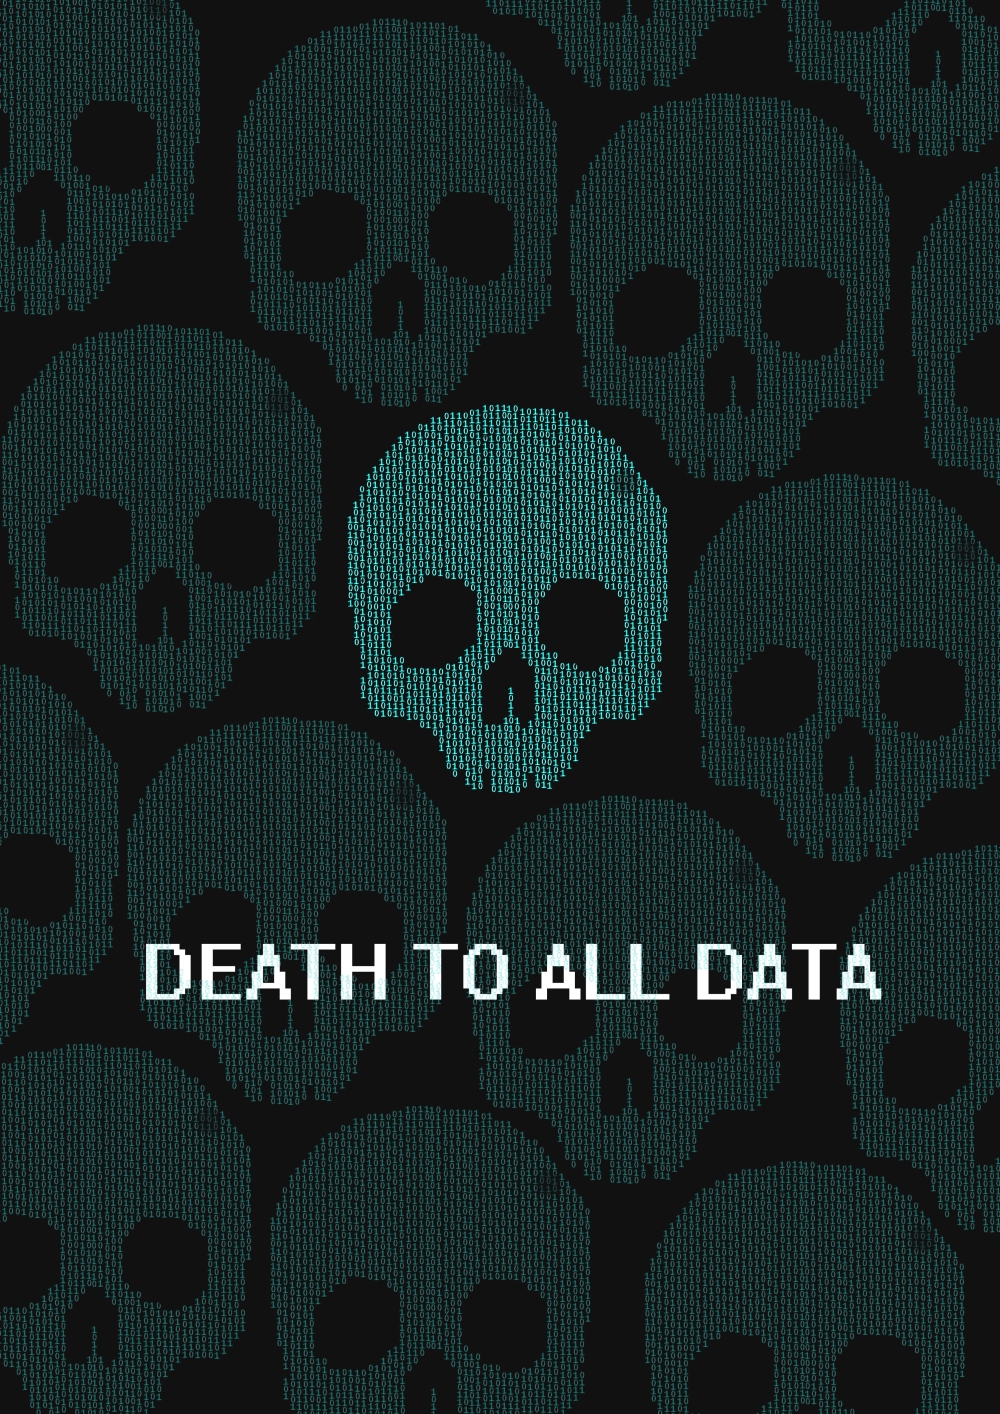 death to all data